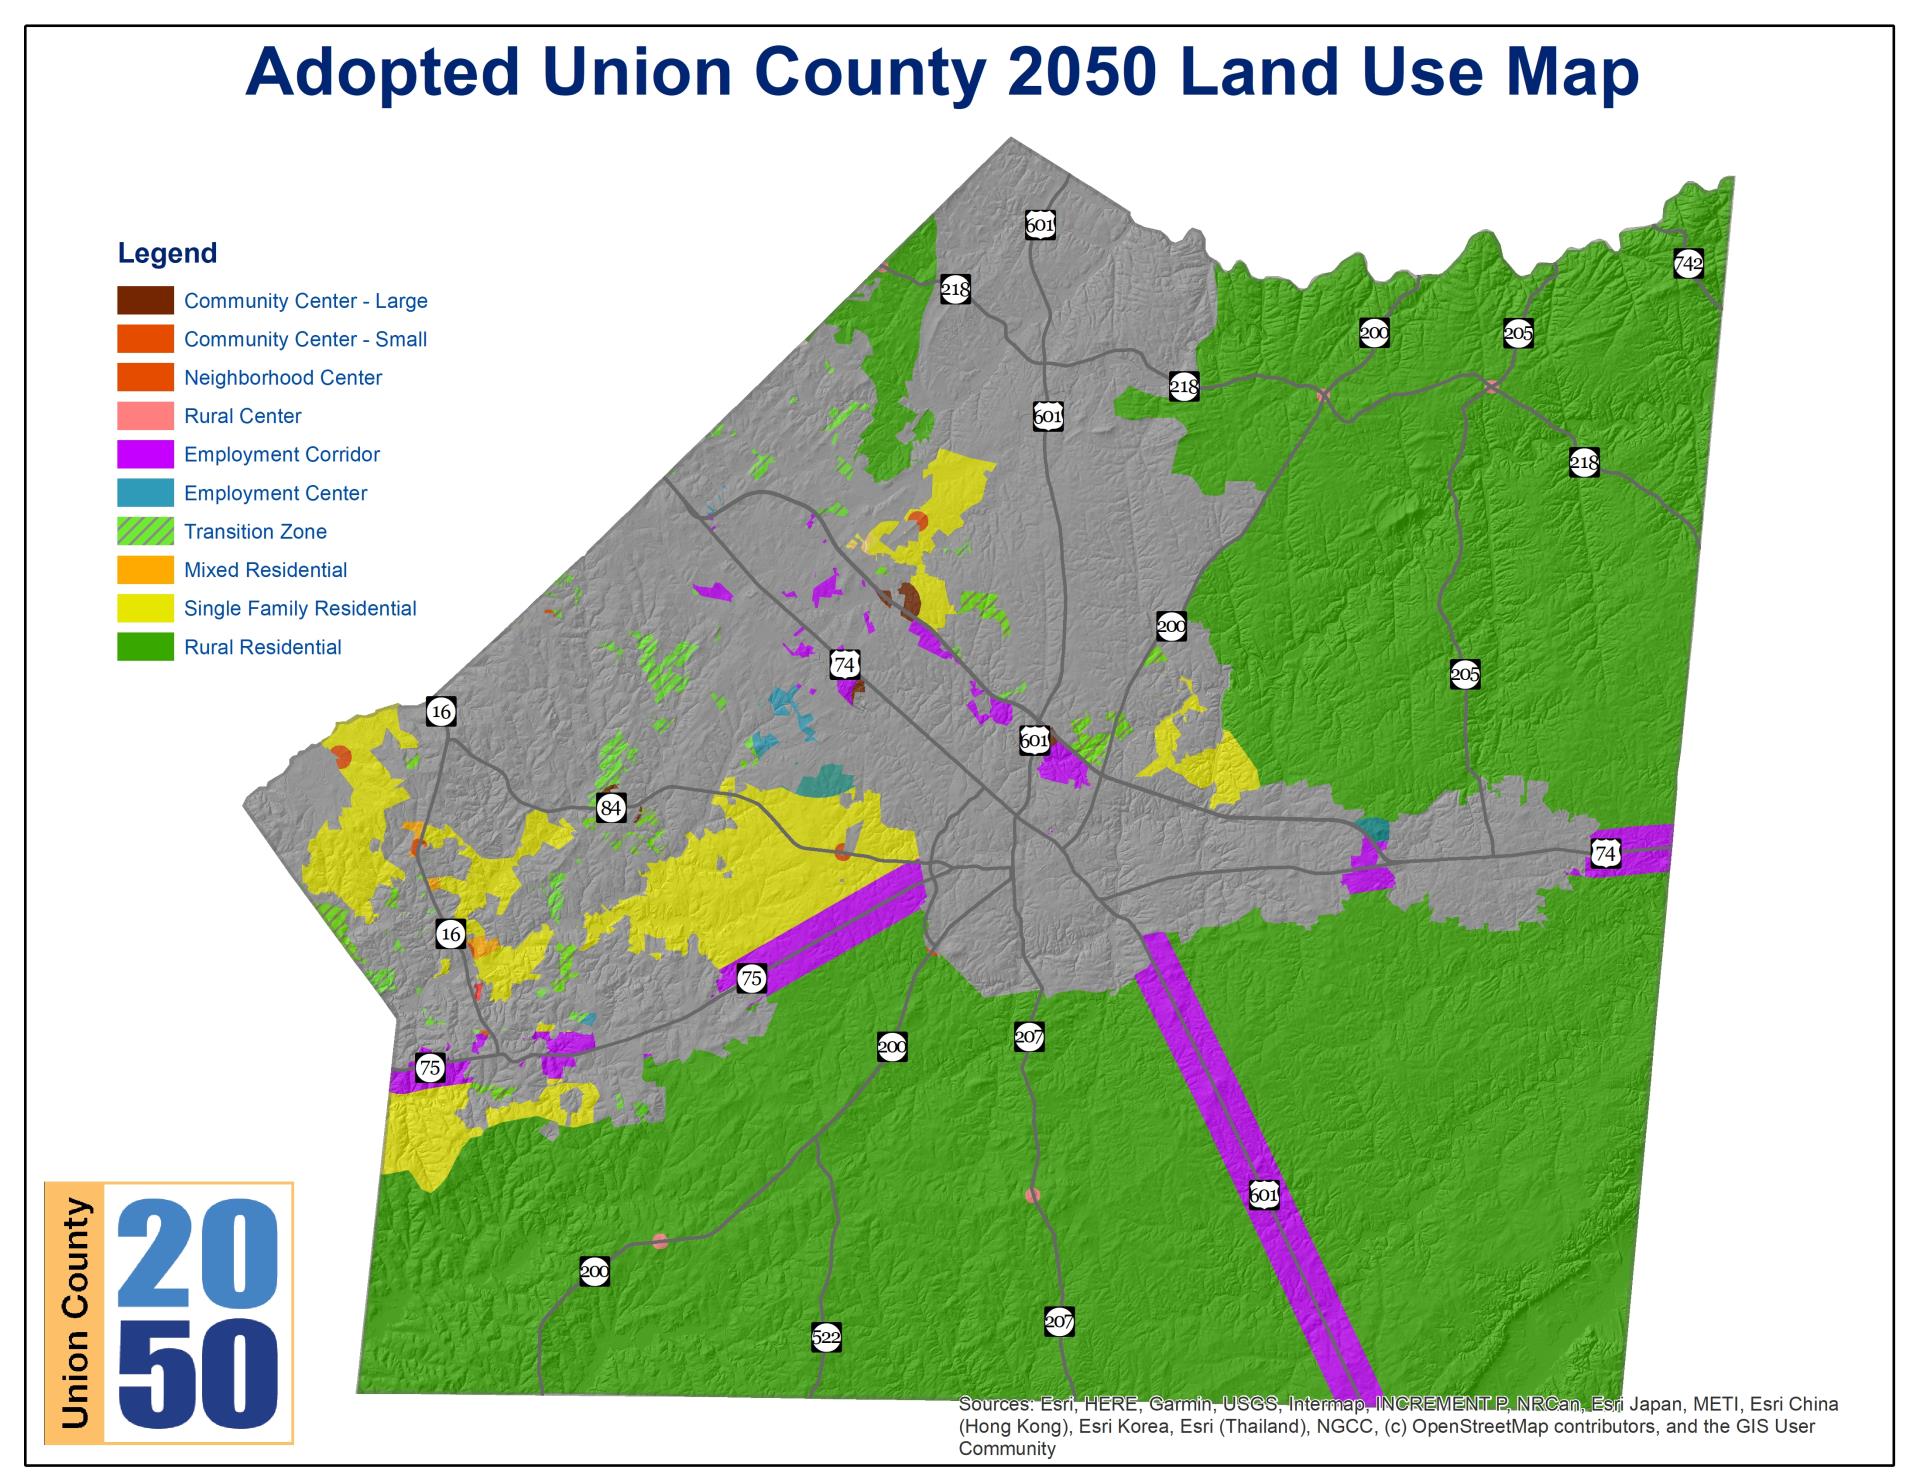 Adopted Union County 2050 LUP